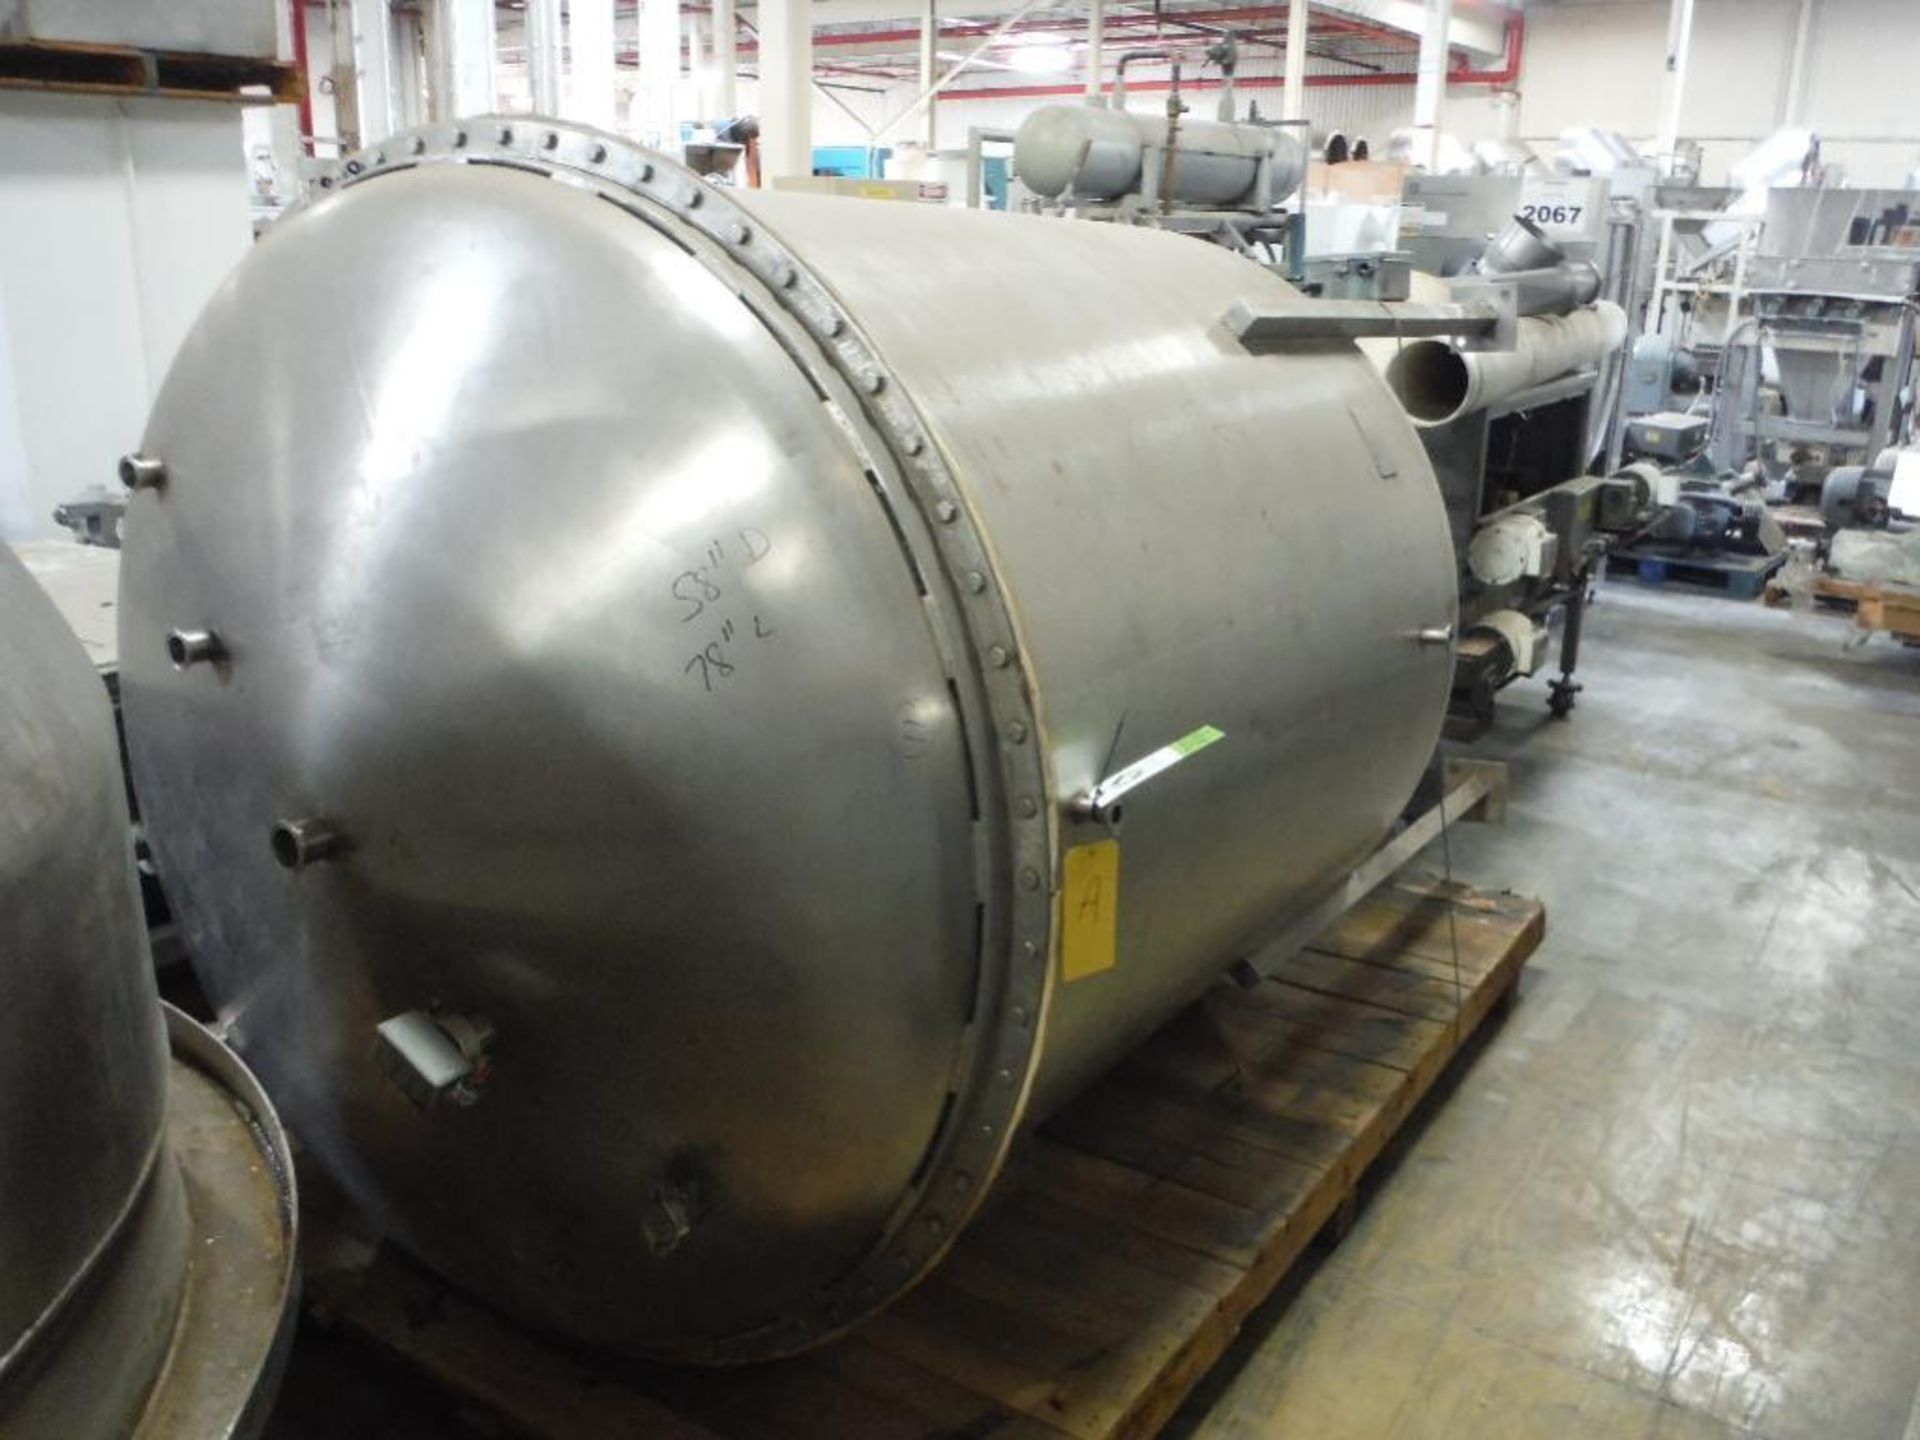 1992 Bulk mfg. SS pressure vessel, 316 SS, 15 psi, 58 in. dia x 78 in. straight side, dish top and b